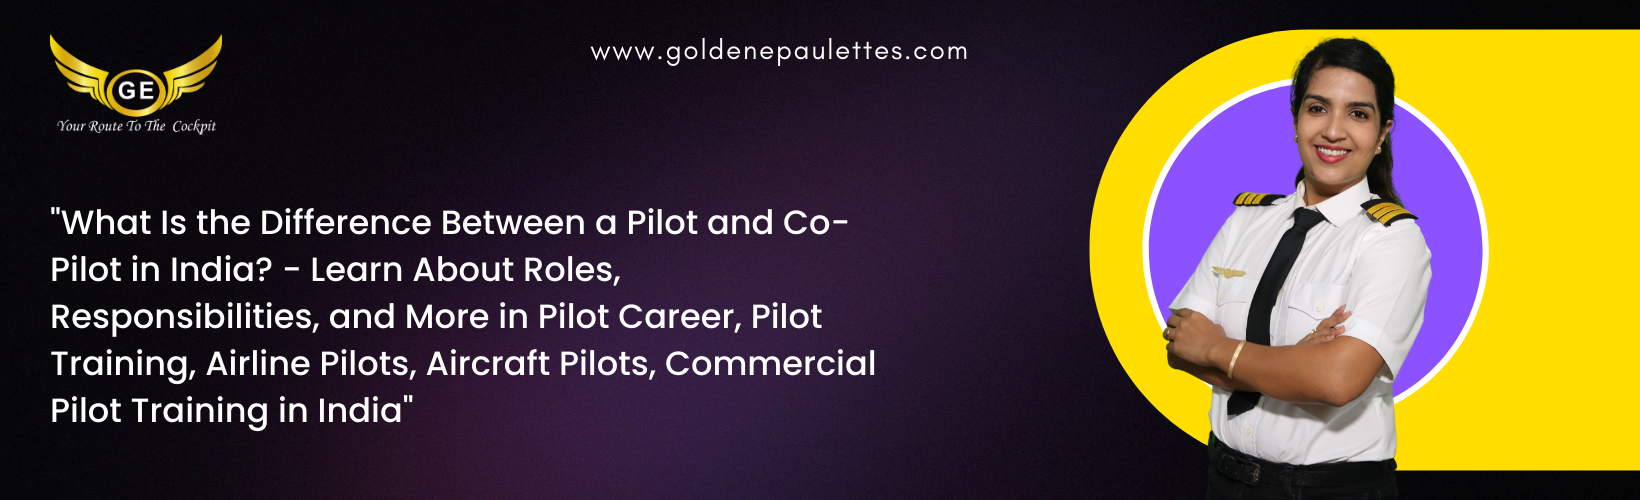 What is the Difference Between a Pilot and a Co-Pilot in India